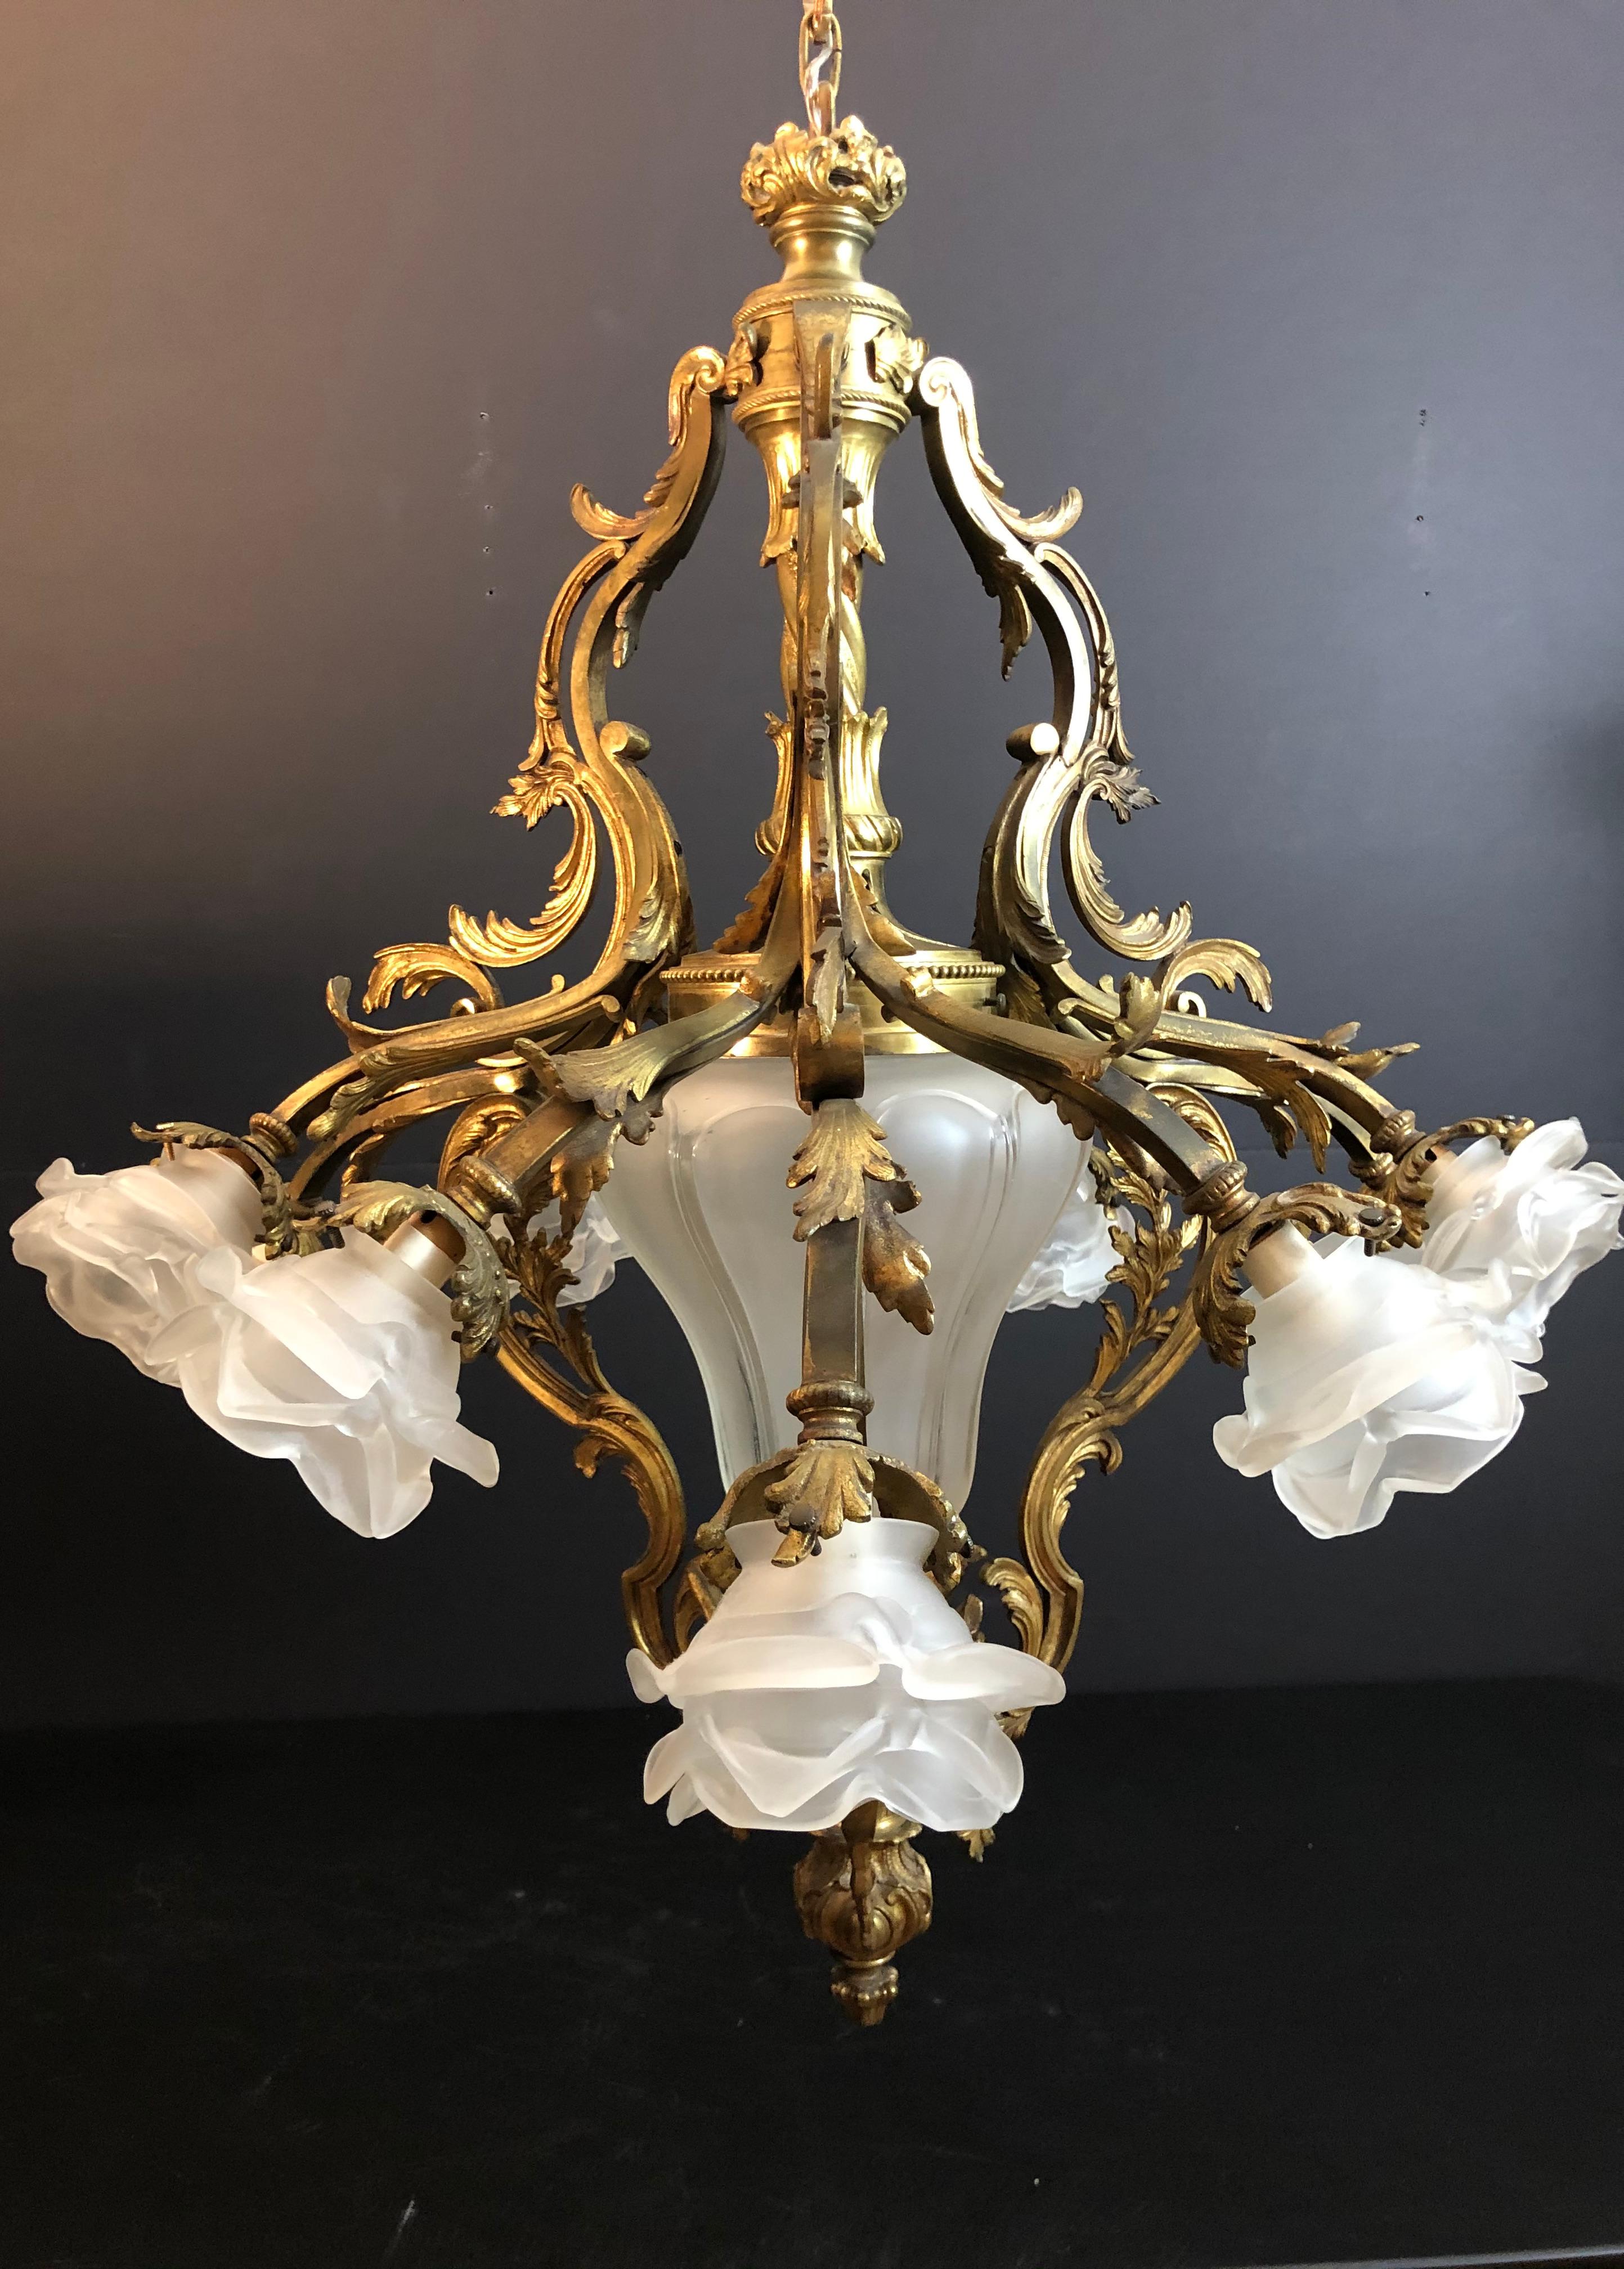 Antique  Louis XV style bronze chandelier with a Rococo influence. Frosted glass rose bud shades on nine scrolled arms with foliate details. Center frosted glass shade conceals additional light. Total of 10 lights.